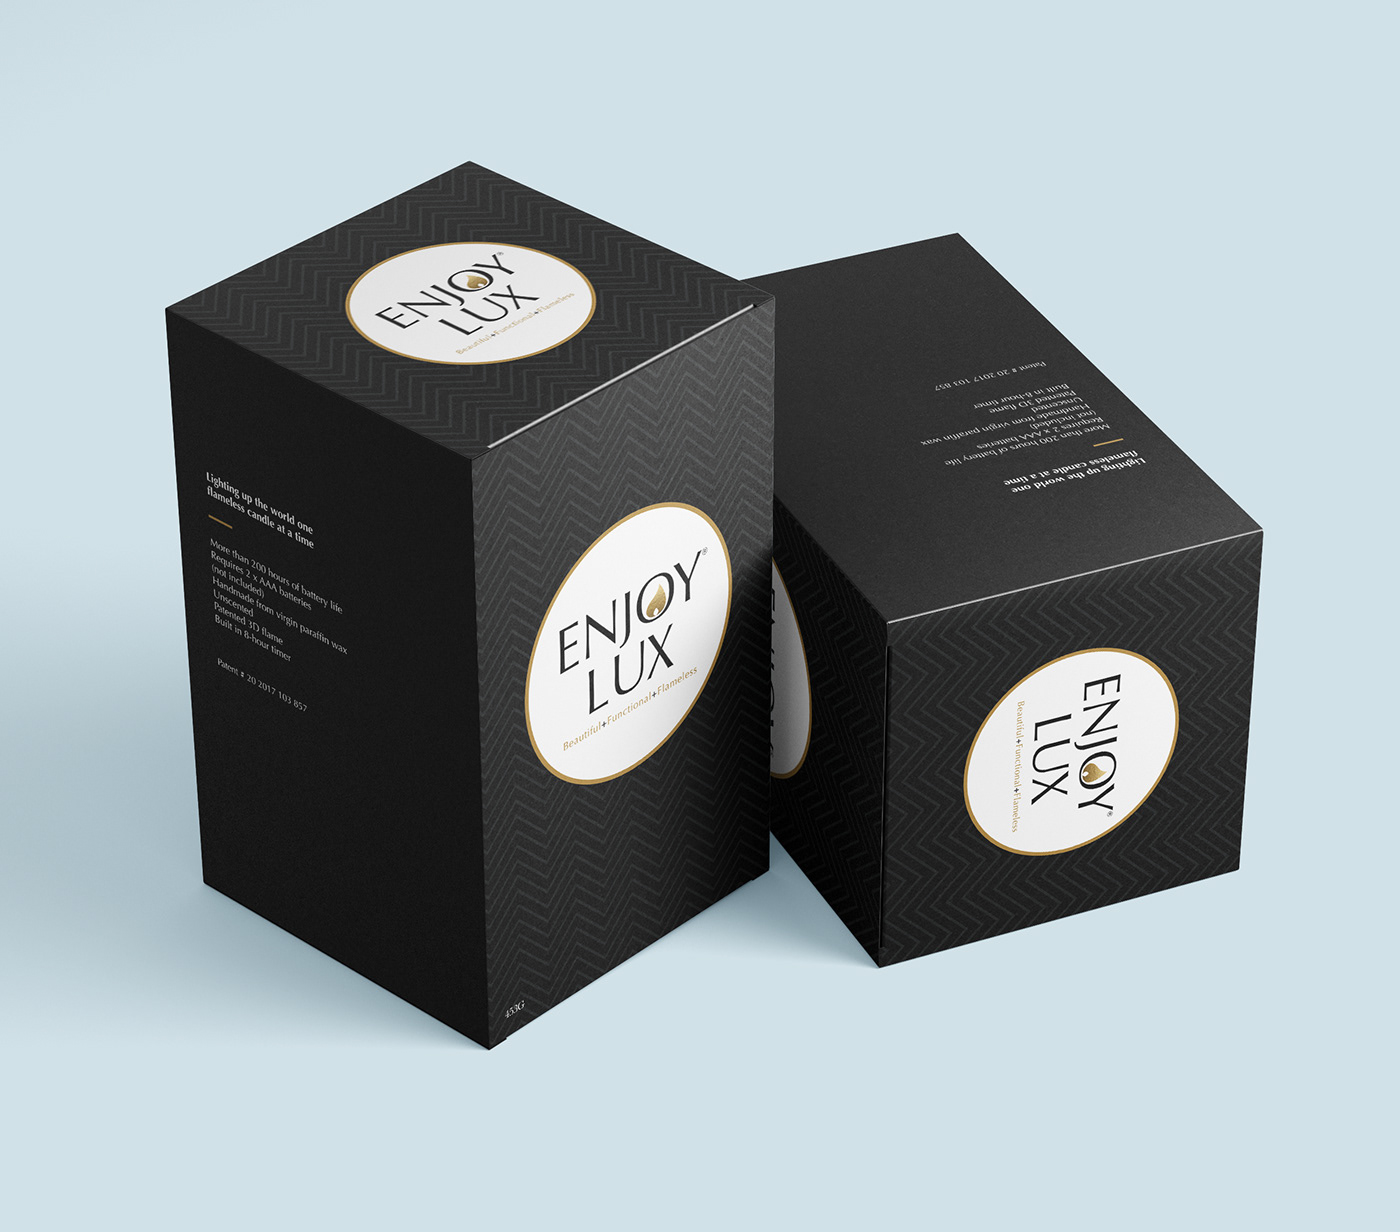 Enjoy Lux Candle Packaging
